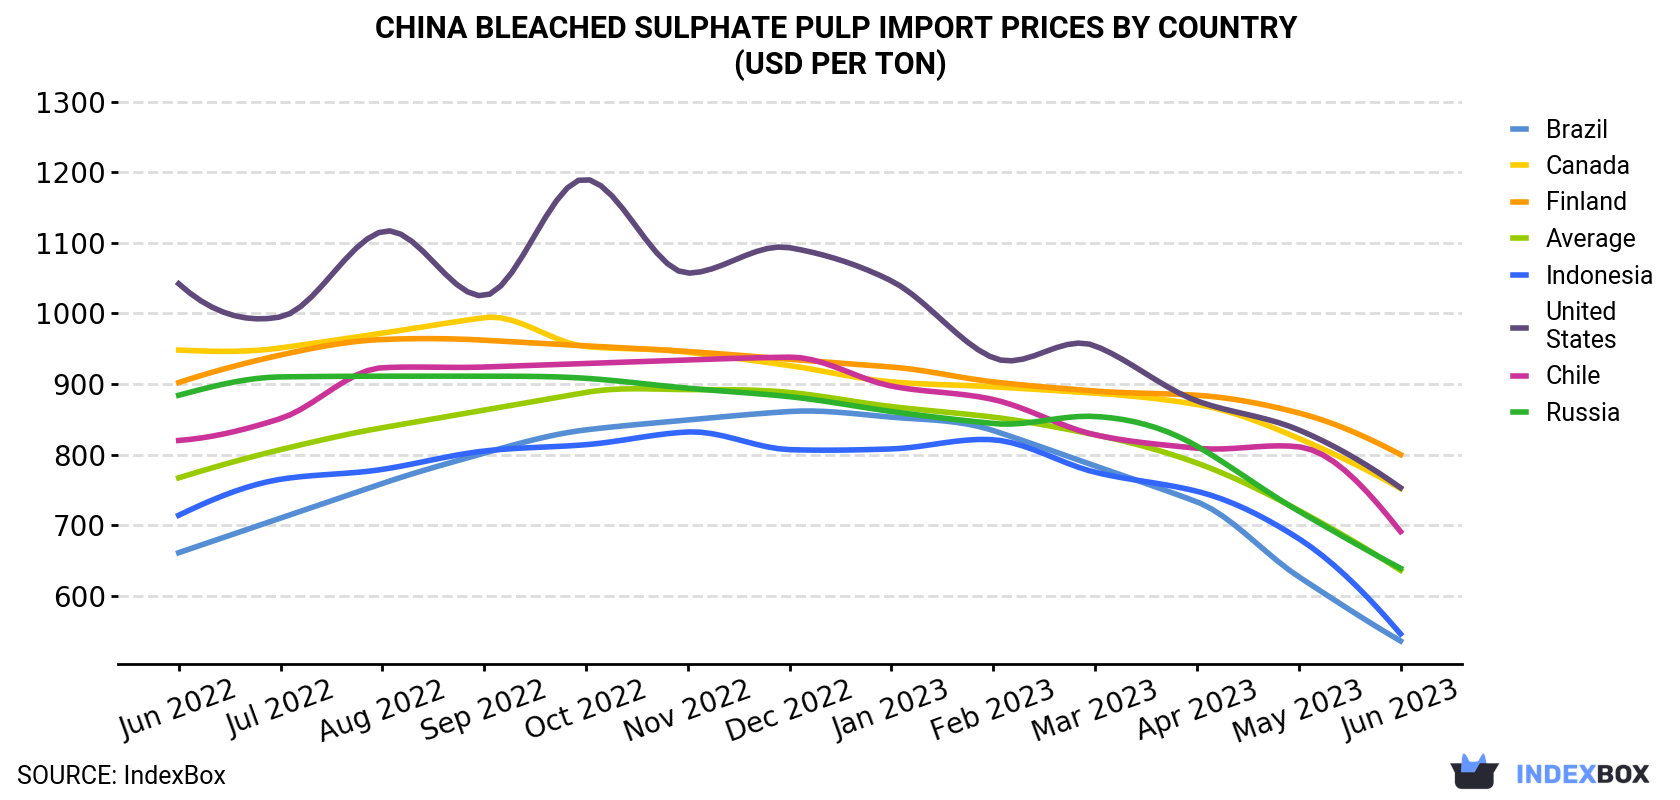 China Bleached Sulphate Pulp Import Prices By Country (USD Per Ton)